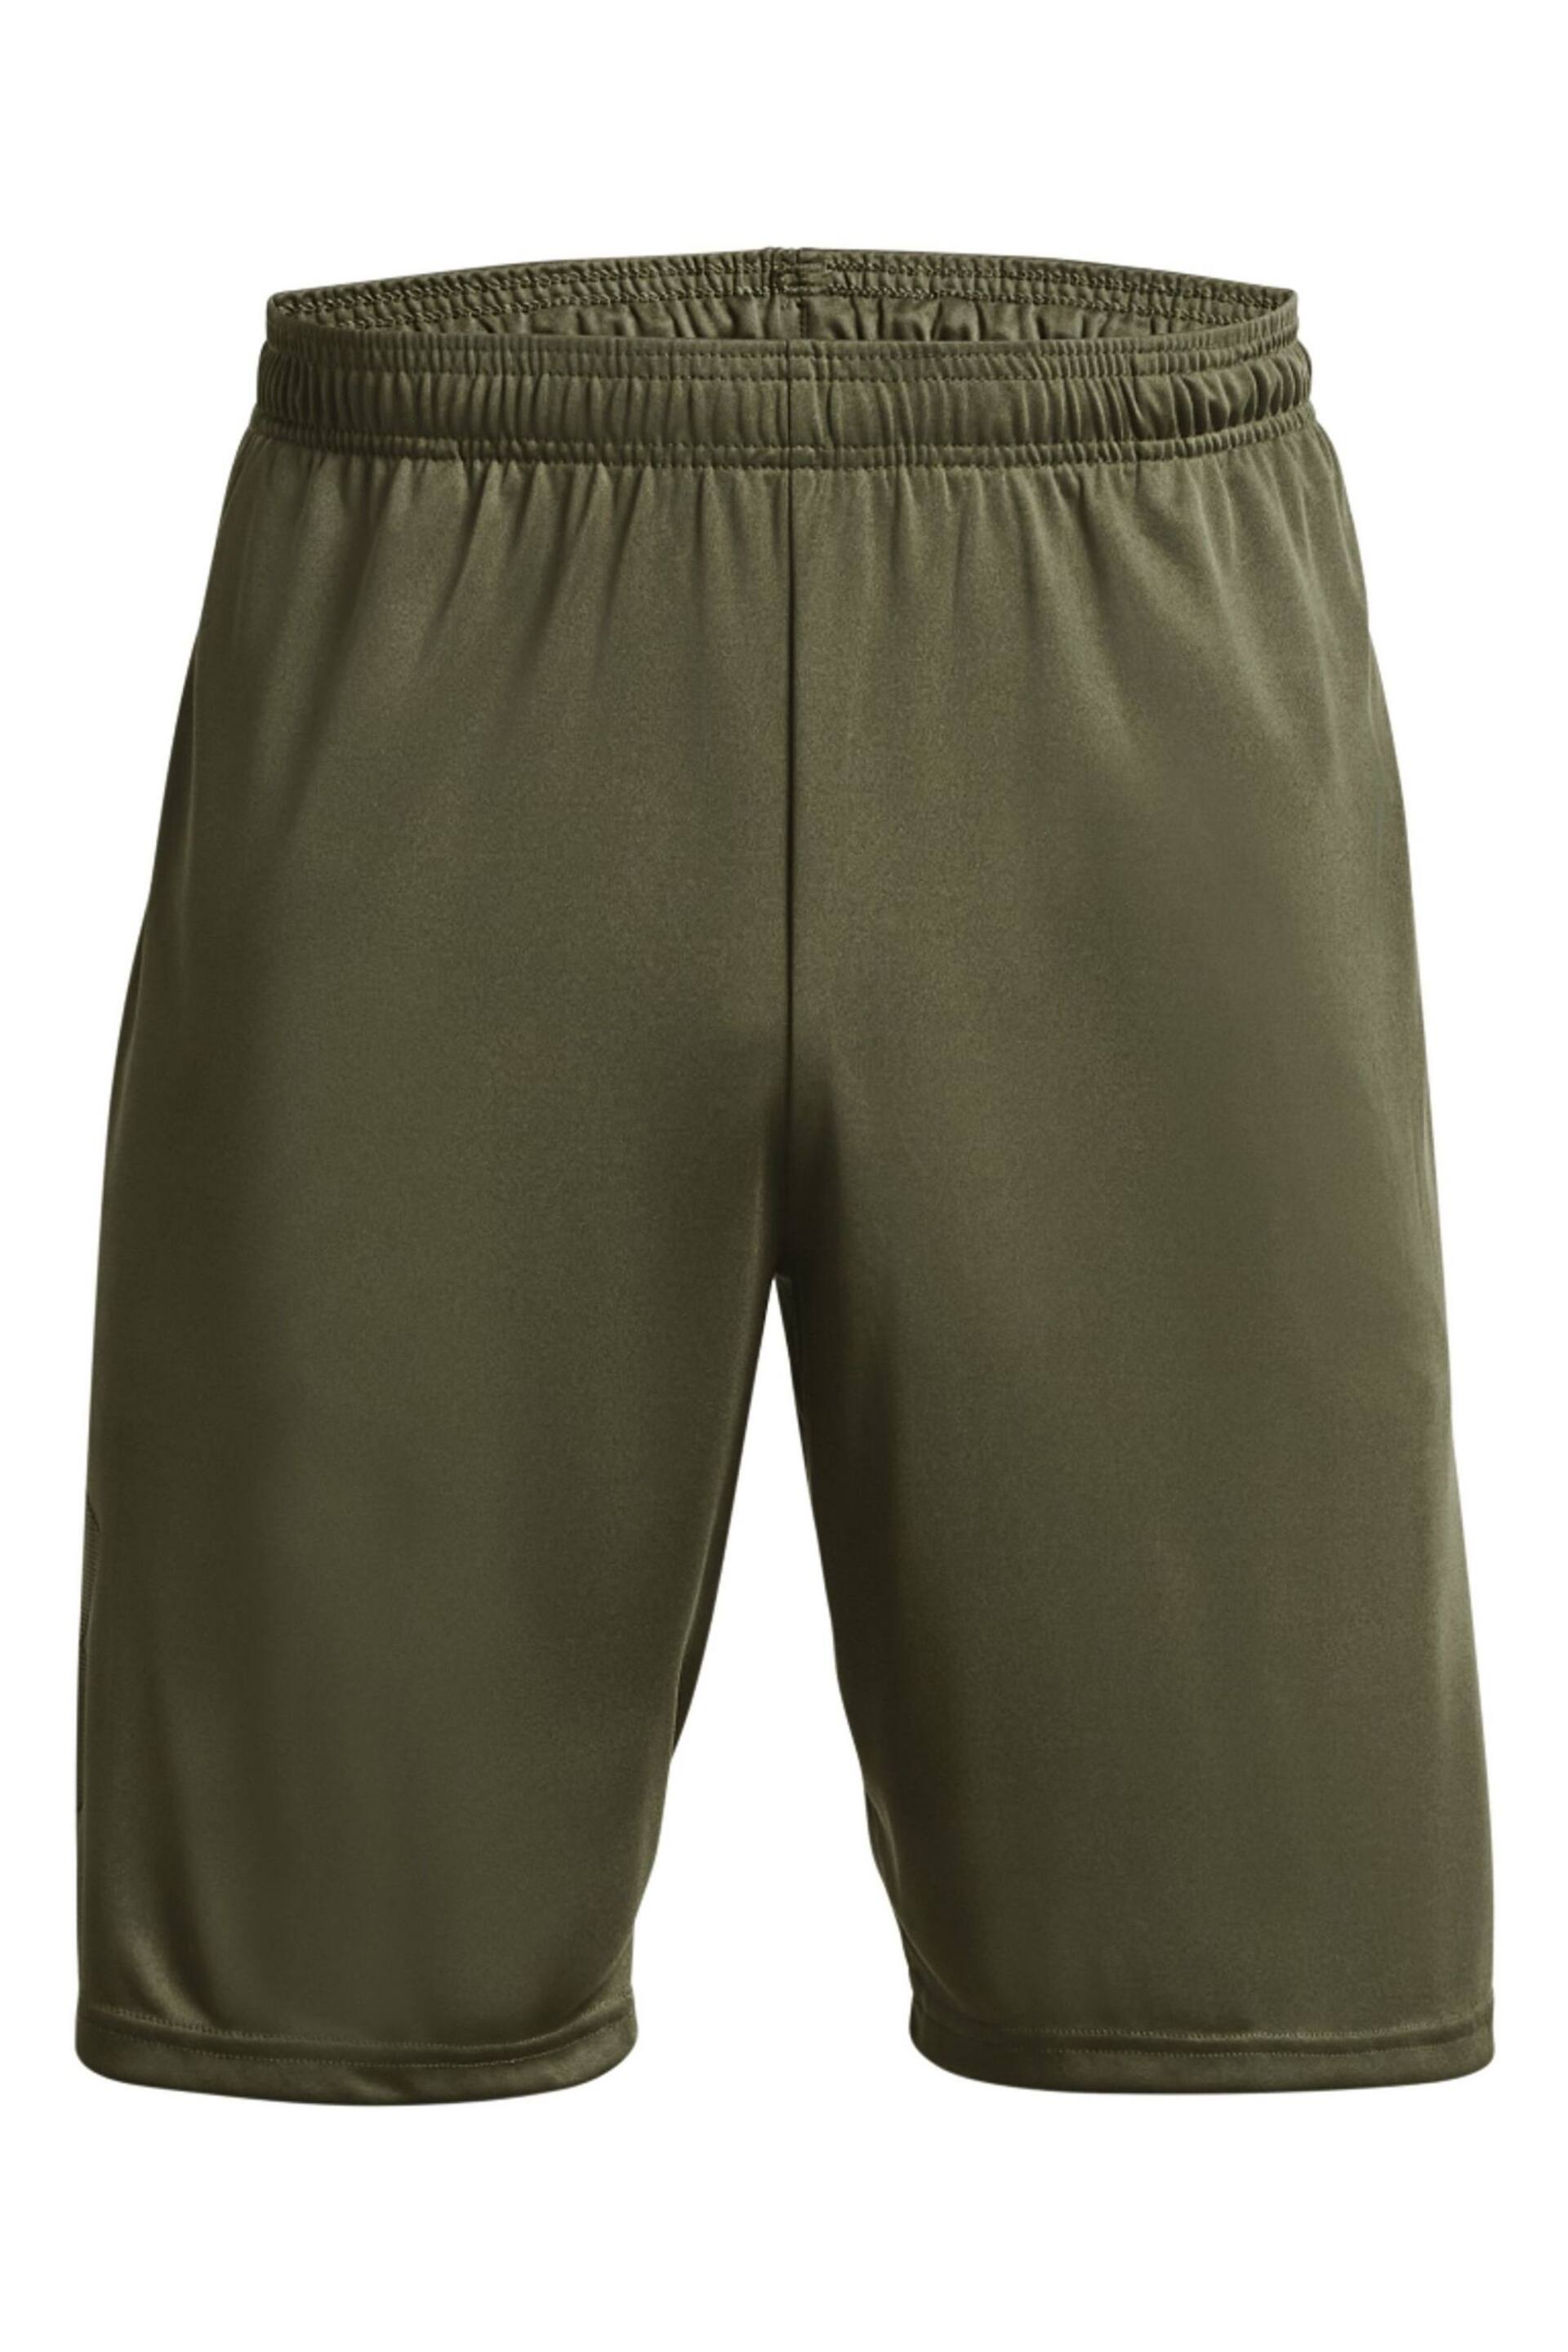 Under Armour Green Tech Graphic Shorts - Image 5 of 7